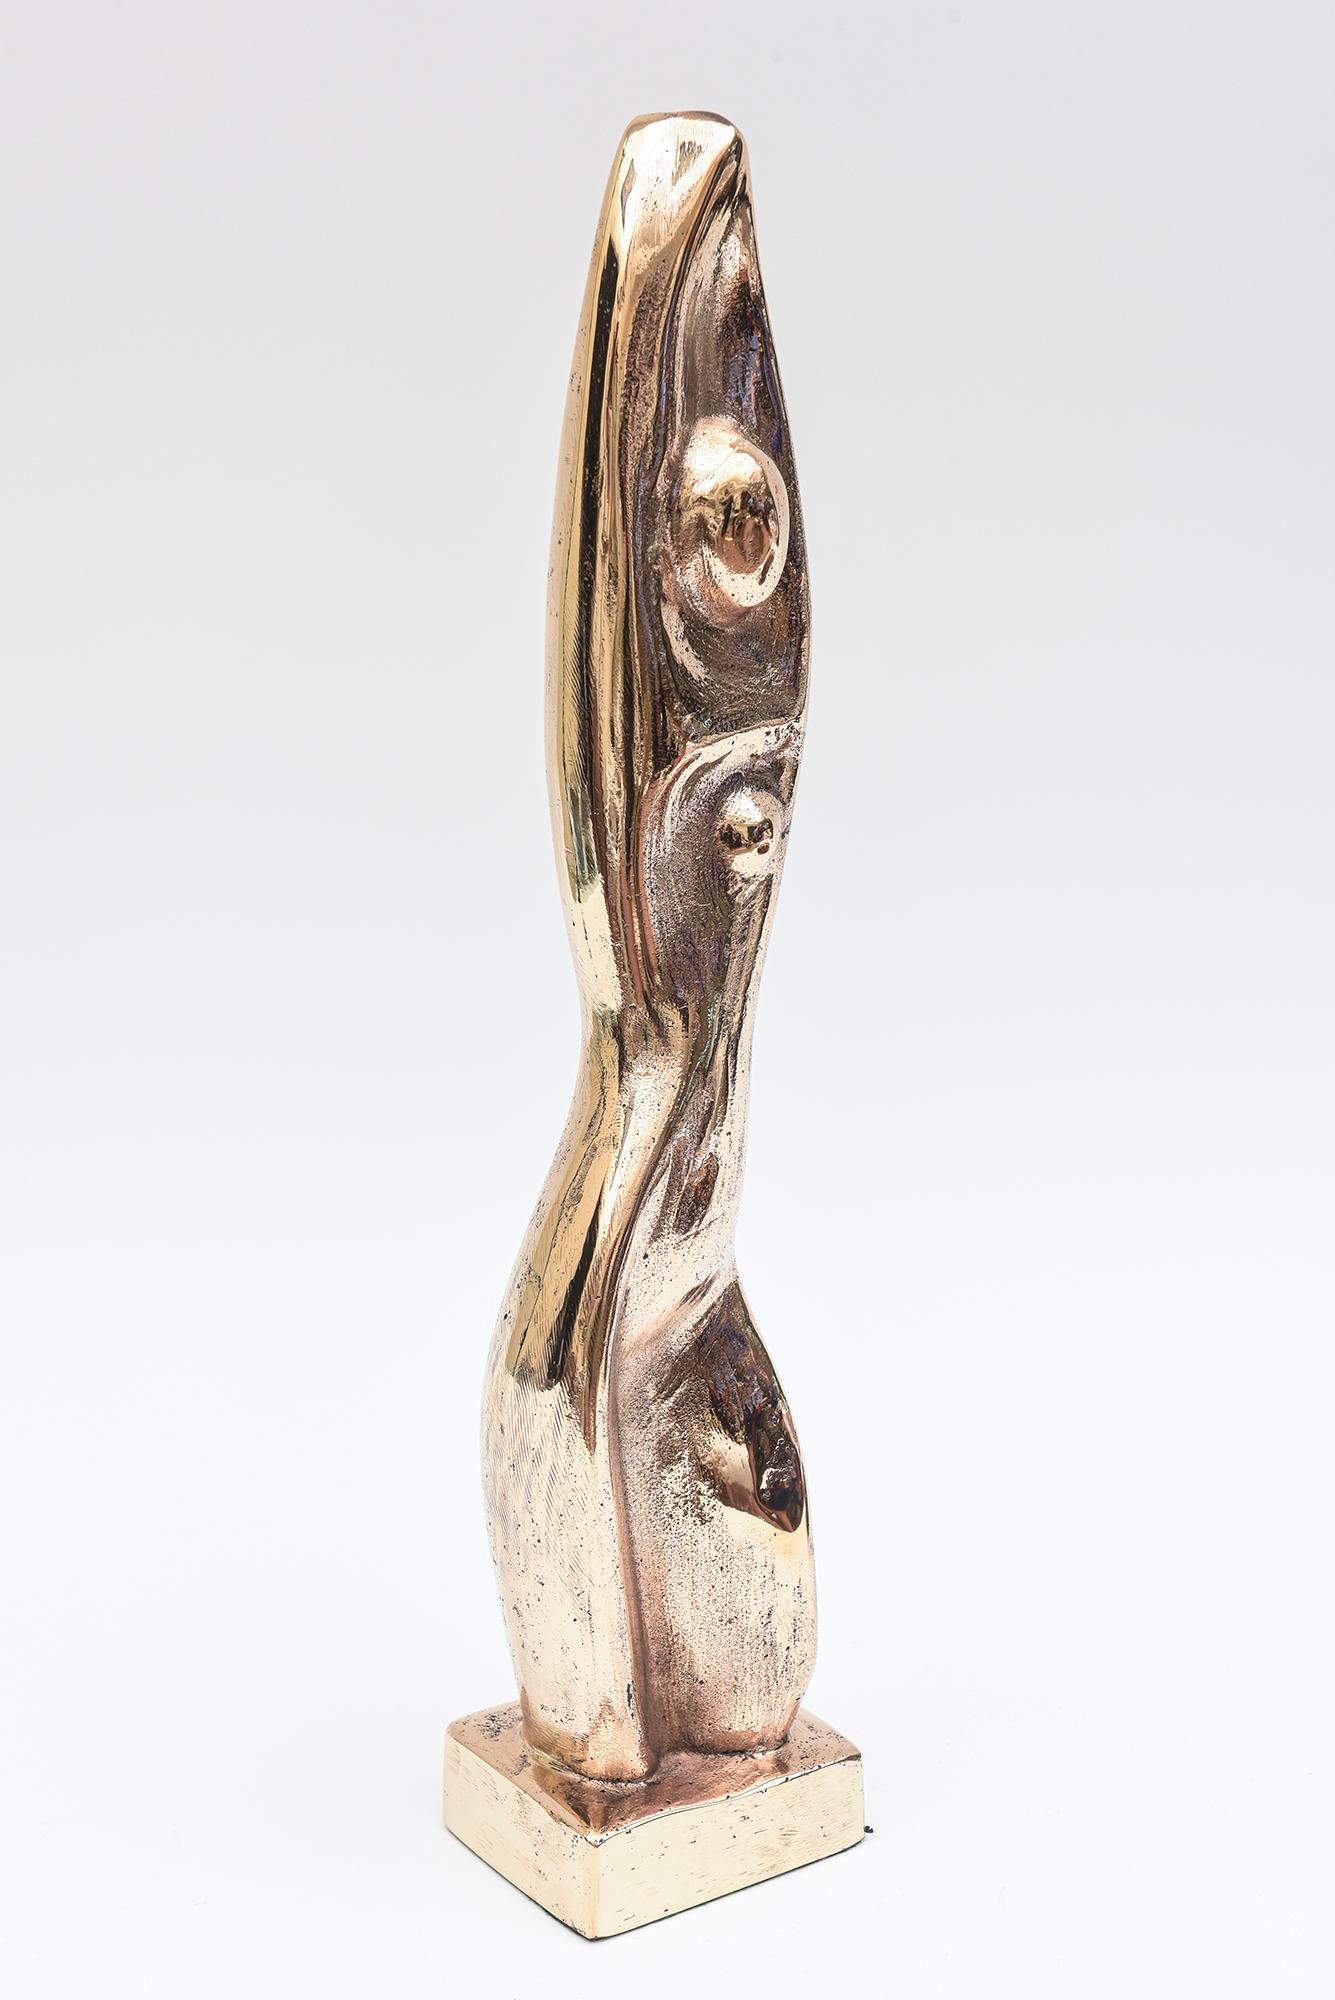 This very sensual heavy bronze sculpture is very Constantin Brancusi meets Jean Arp. it is an abstract meets figurative female form in repose and pose. It is restrained and elegant. There is a deep underlying sensuality to the bronze. The sculptor